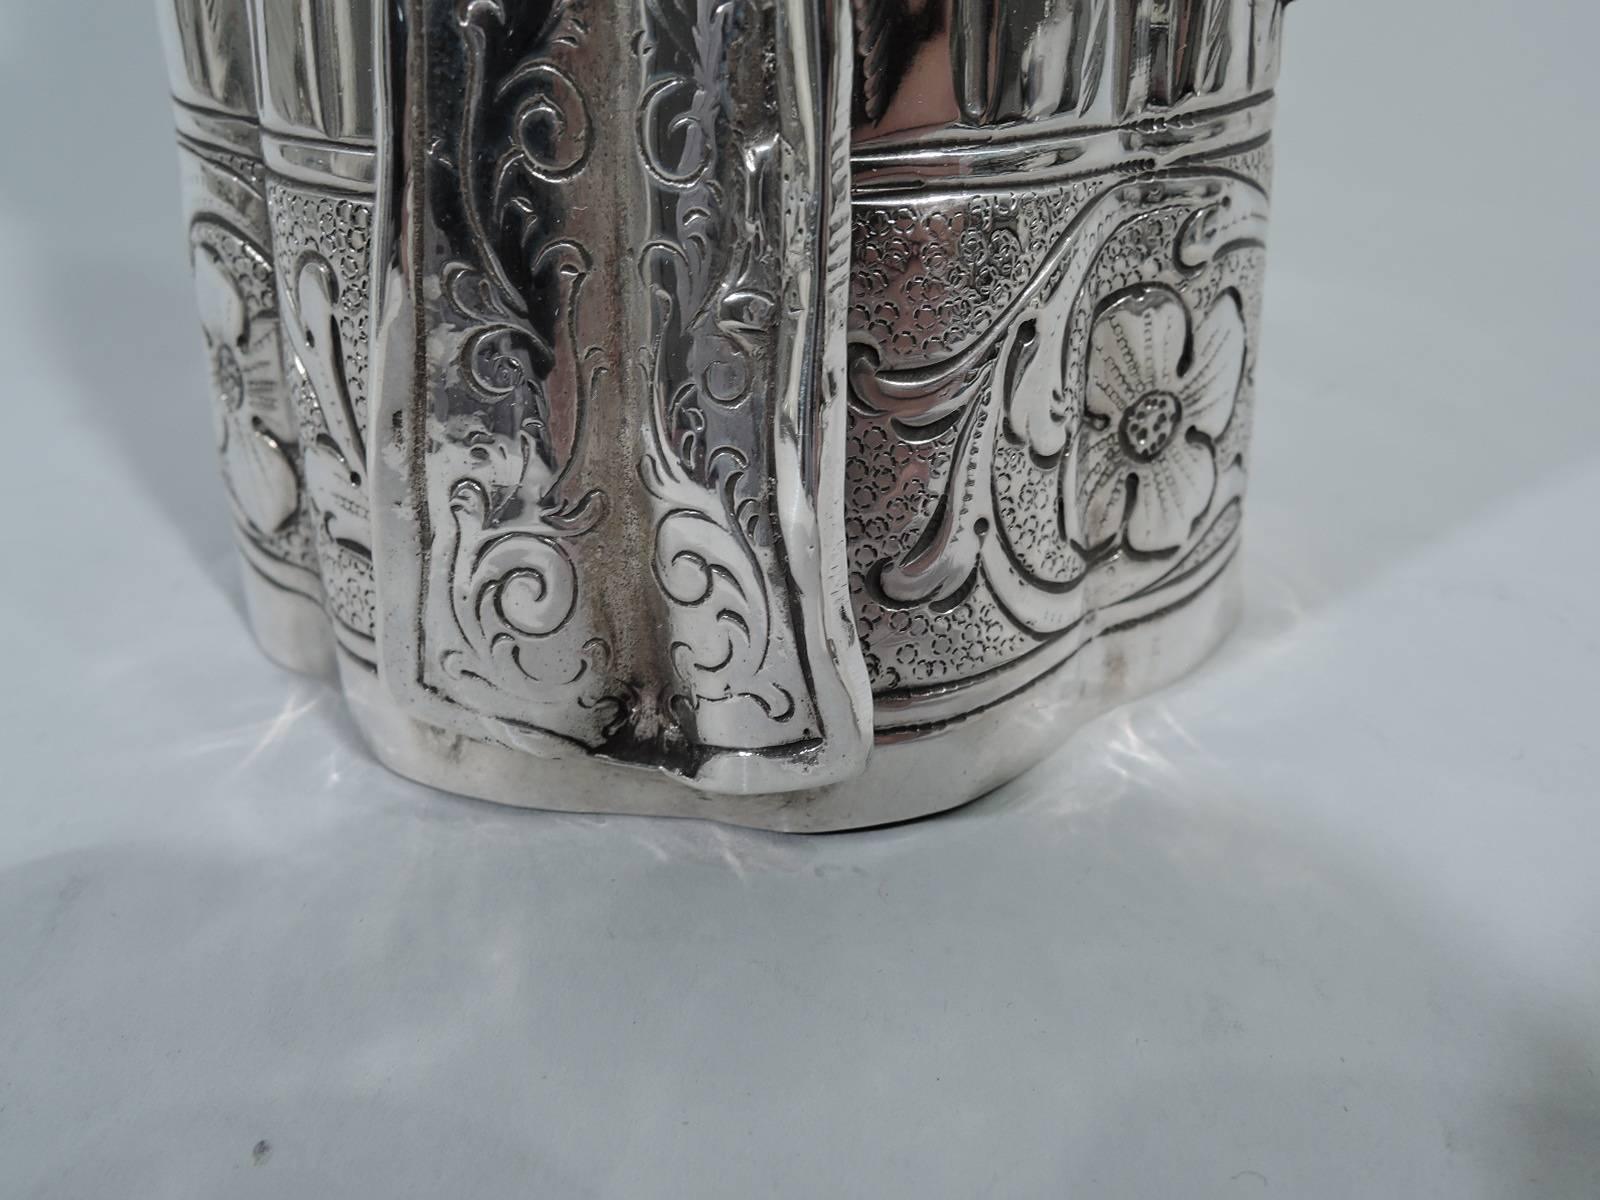 20th Century Antique German Sterling Silver Wedding Ceremonial King Cup